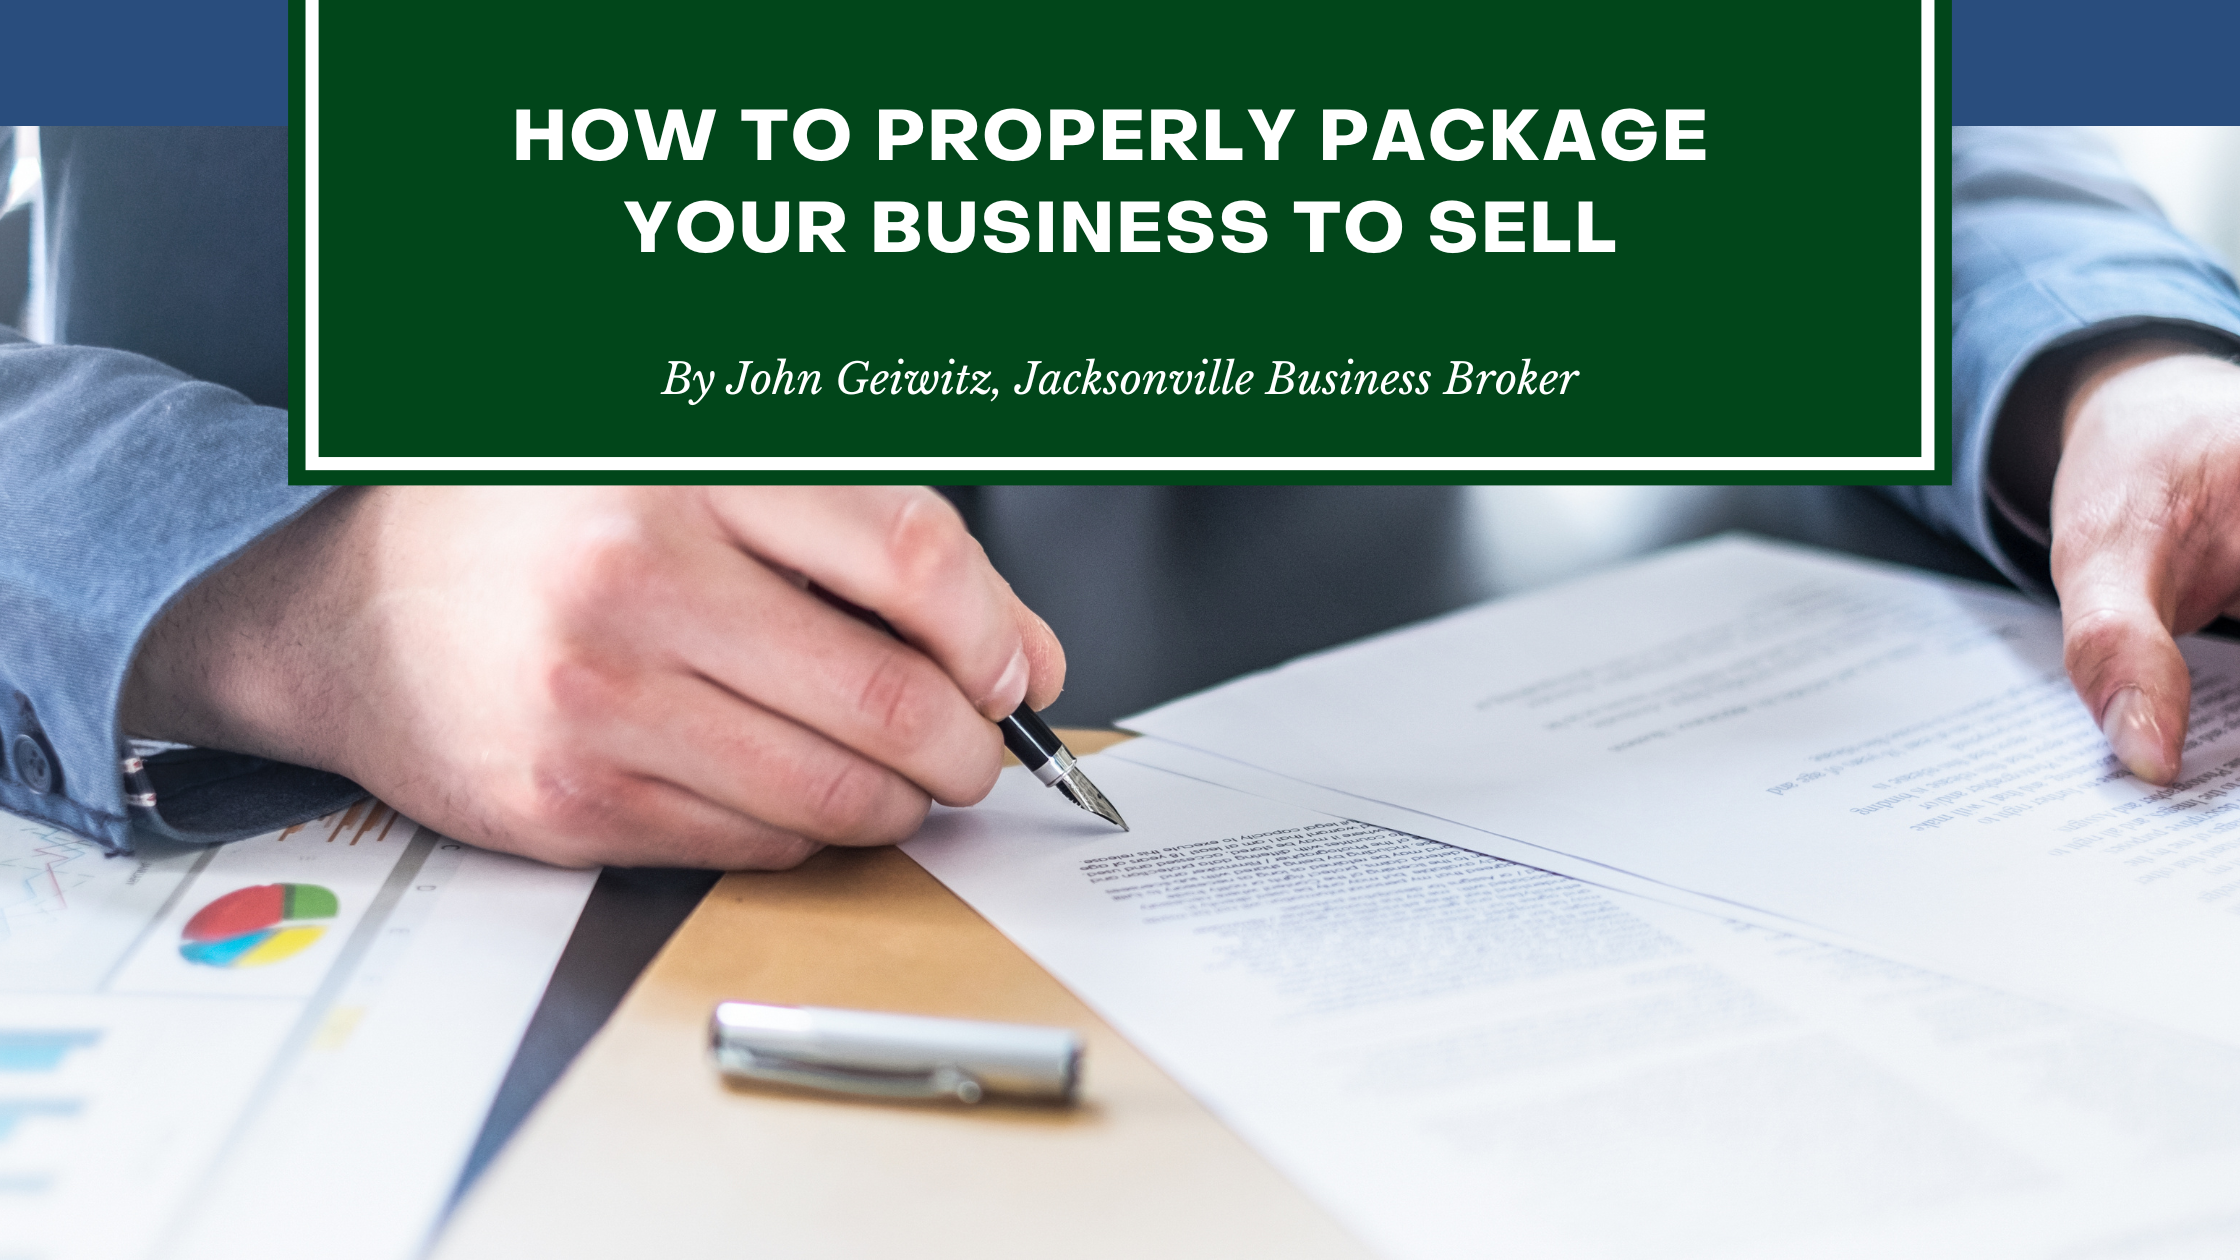 How to Properly Package Your Business to Sell